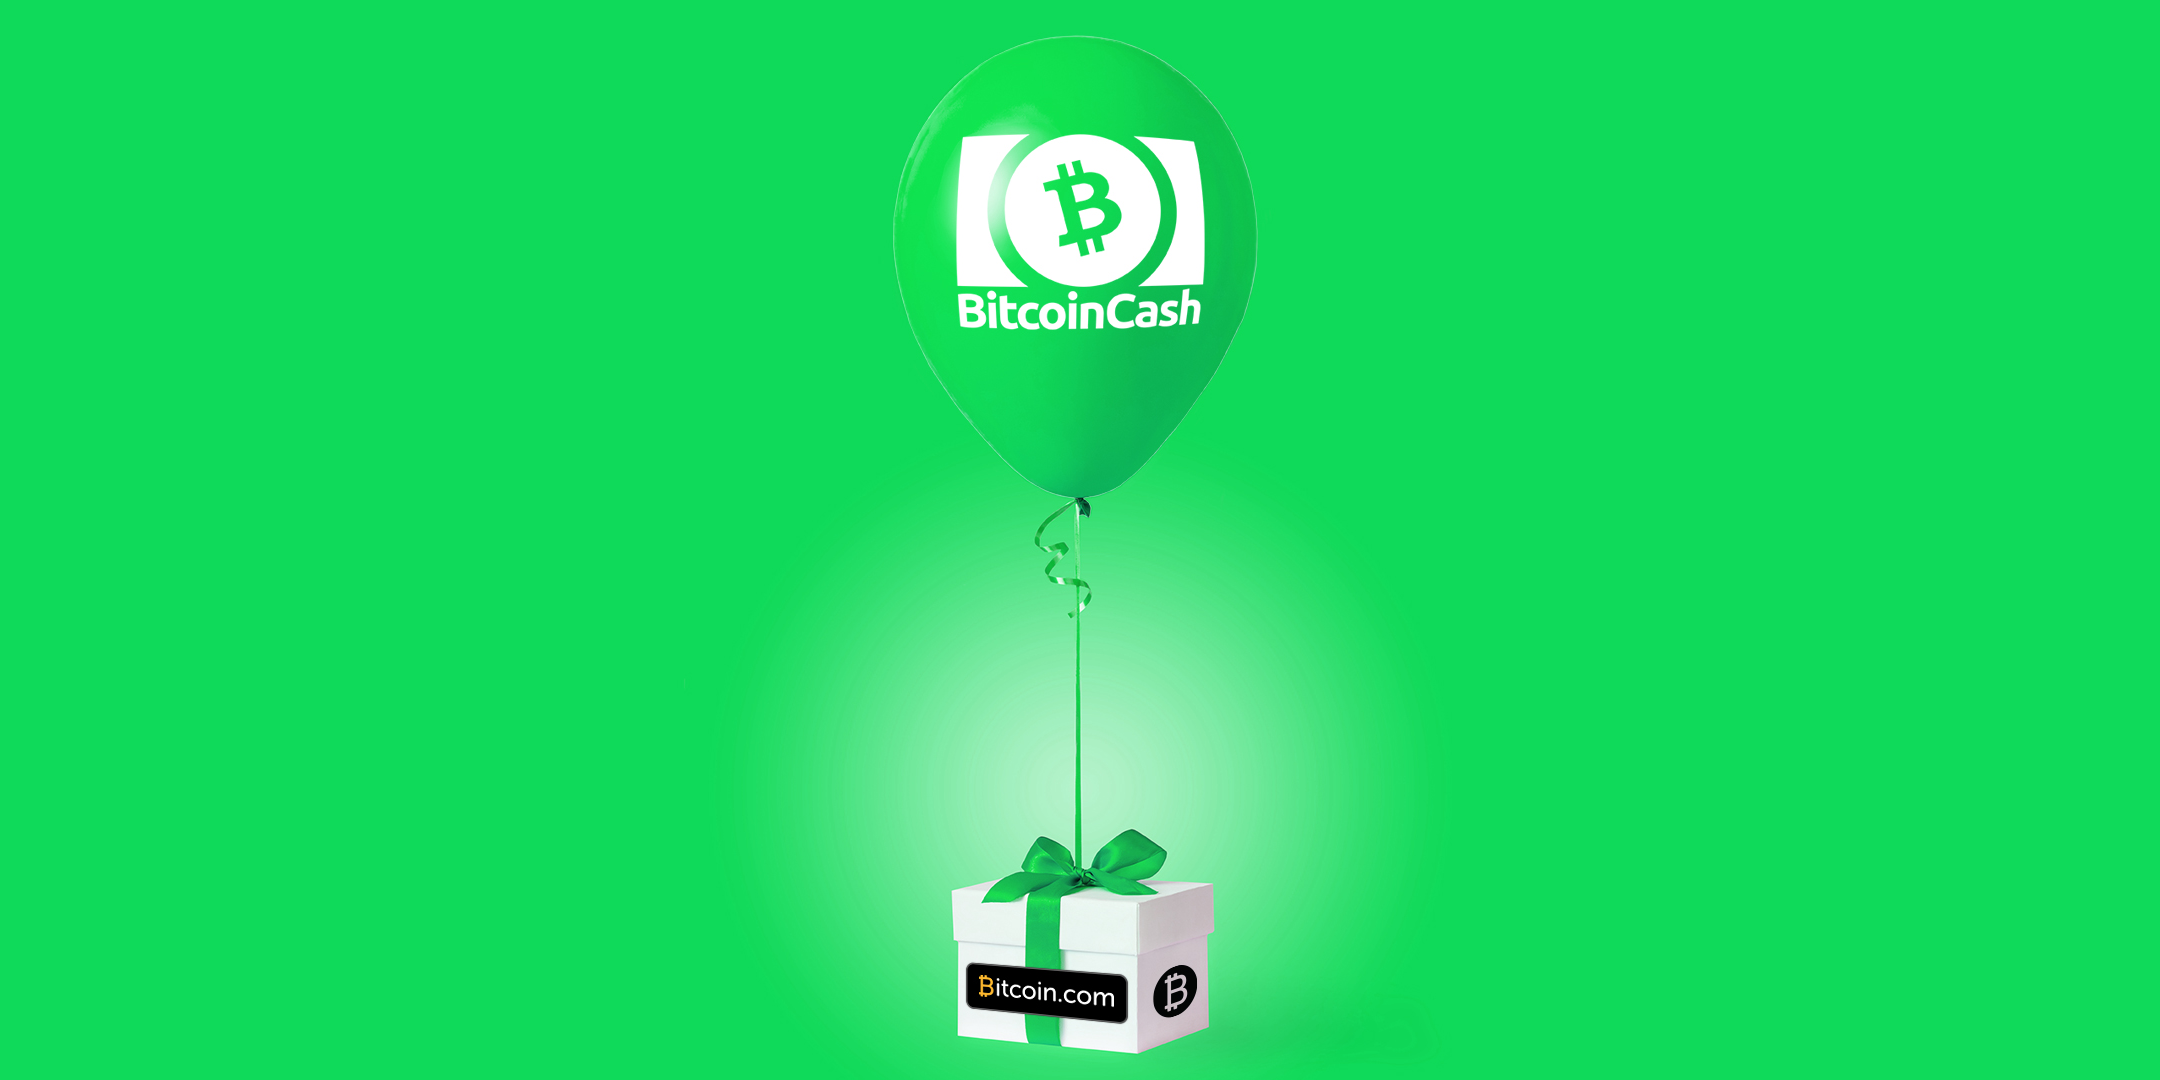 Bitcoin.com Pairs up with eGifter to Simplify and Streamline Gift Card Purchases